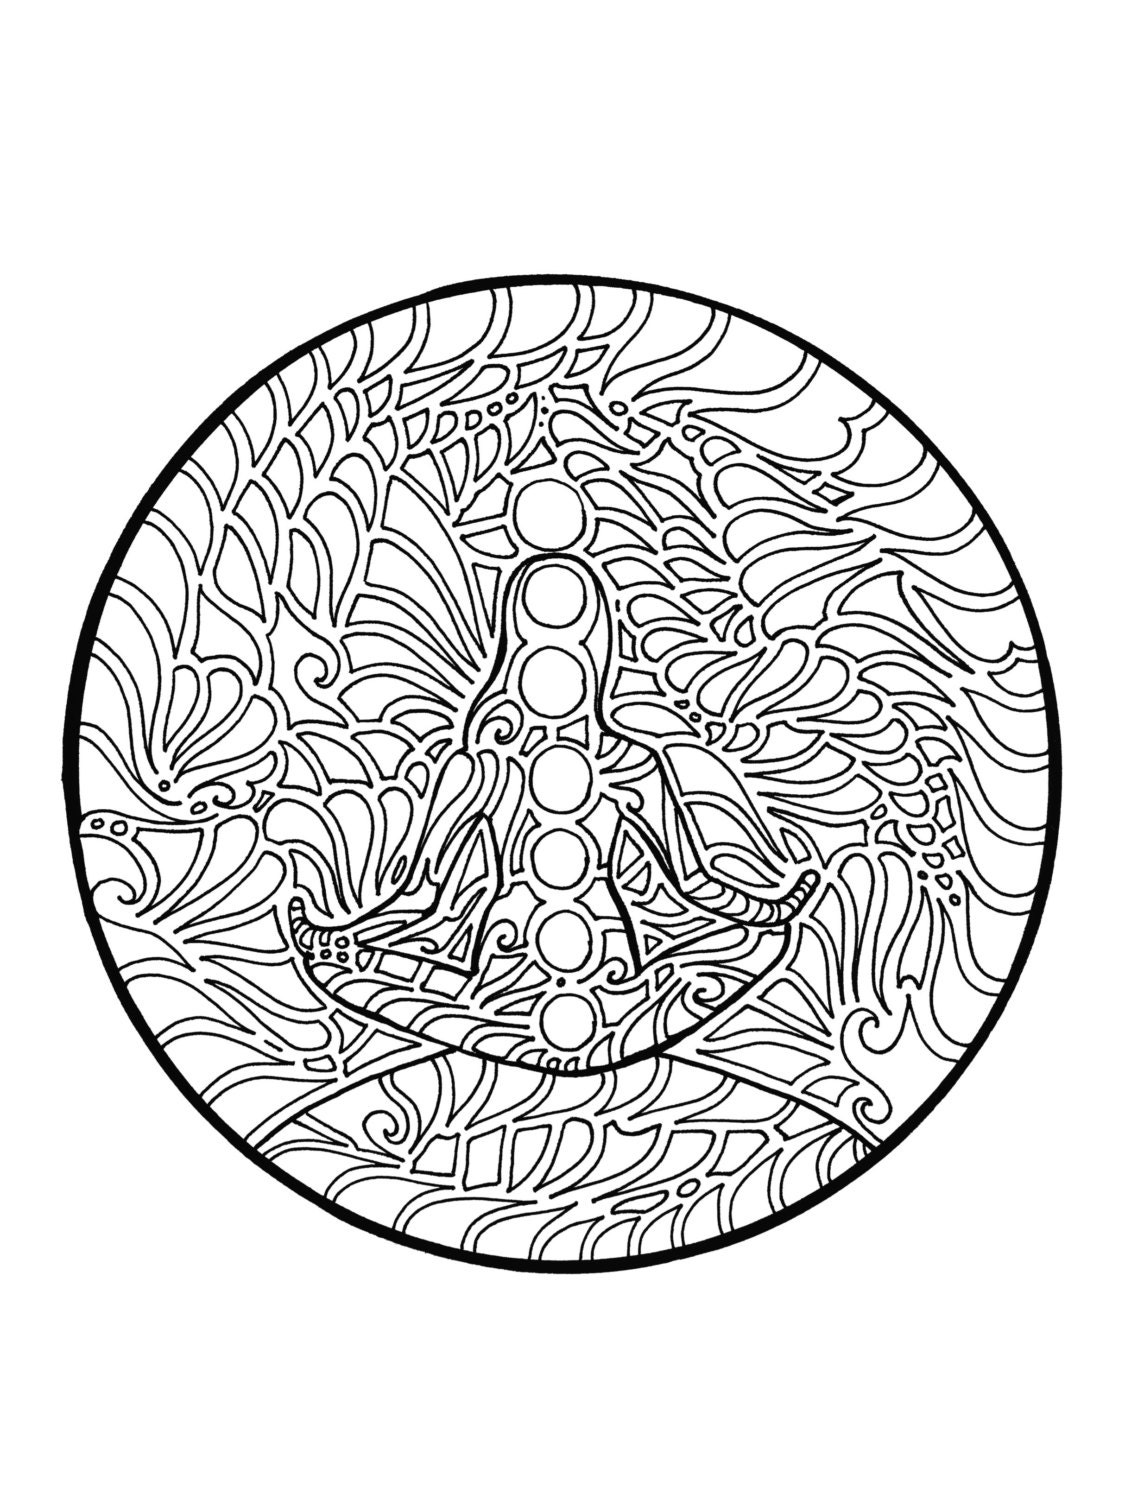 Yoga Coloring Pages For Adults, Yoga Coloring Pages At ...